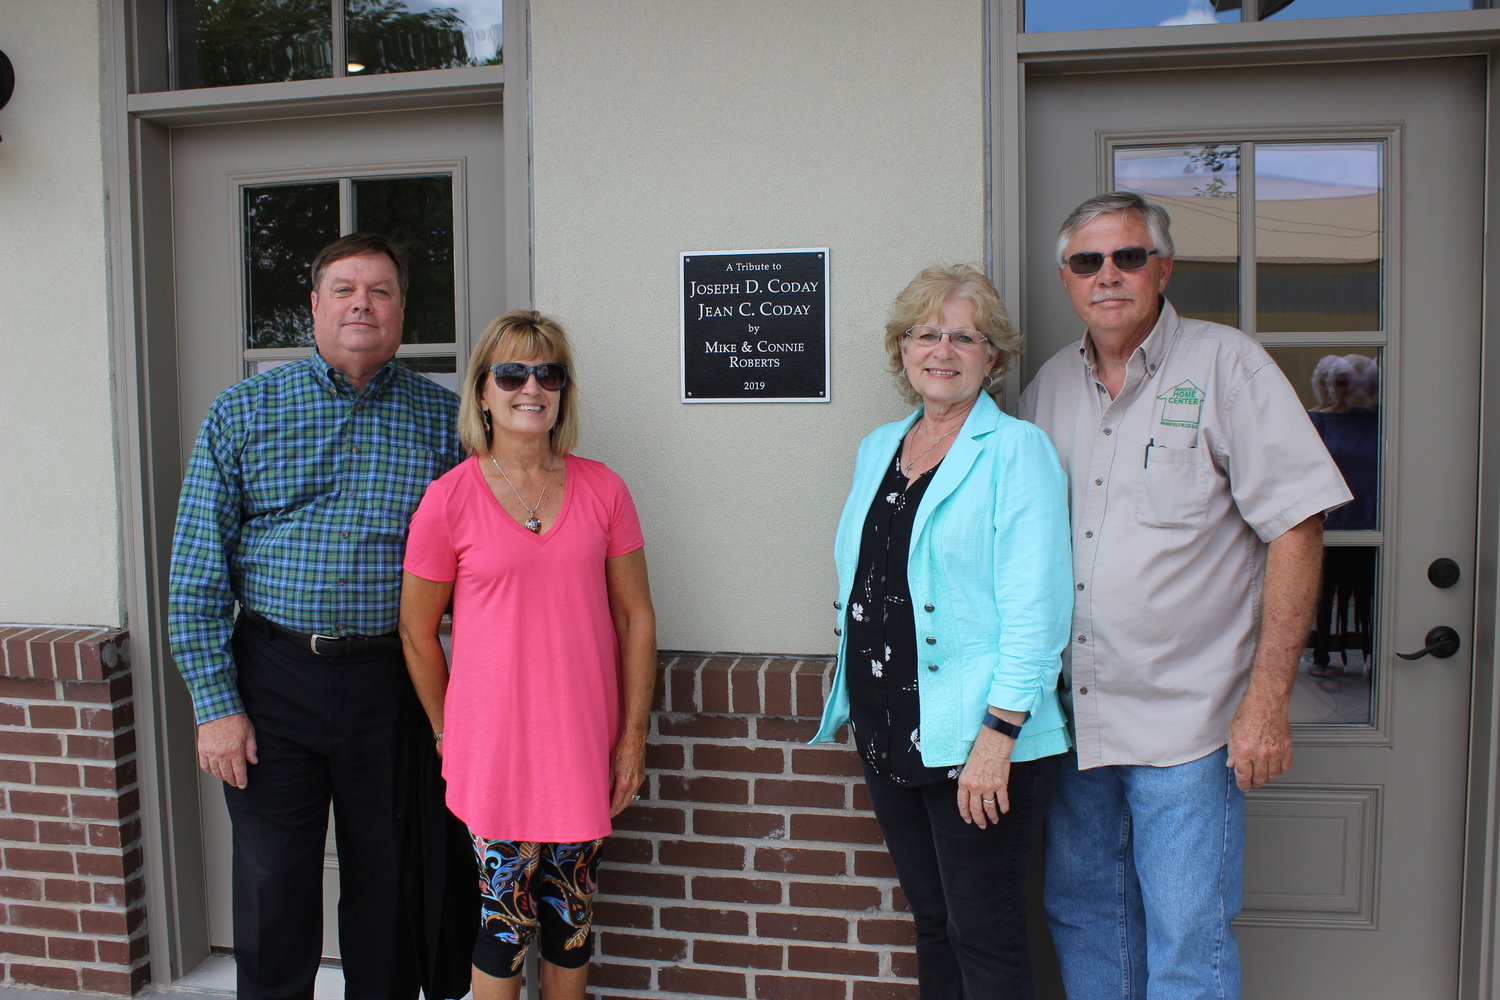 A special plaque was unveiled during the Mansfield Depot dedication ceremony paying tribute to Joseph D. Coday and Jean C. Coday from Connie and Mike Rogers, on the right. Also pictured are Joe and Kelley Coday.